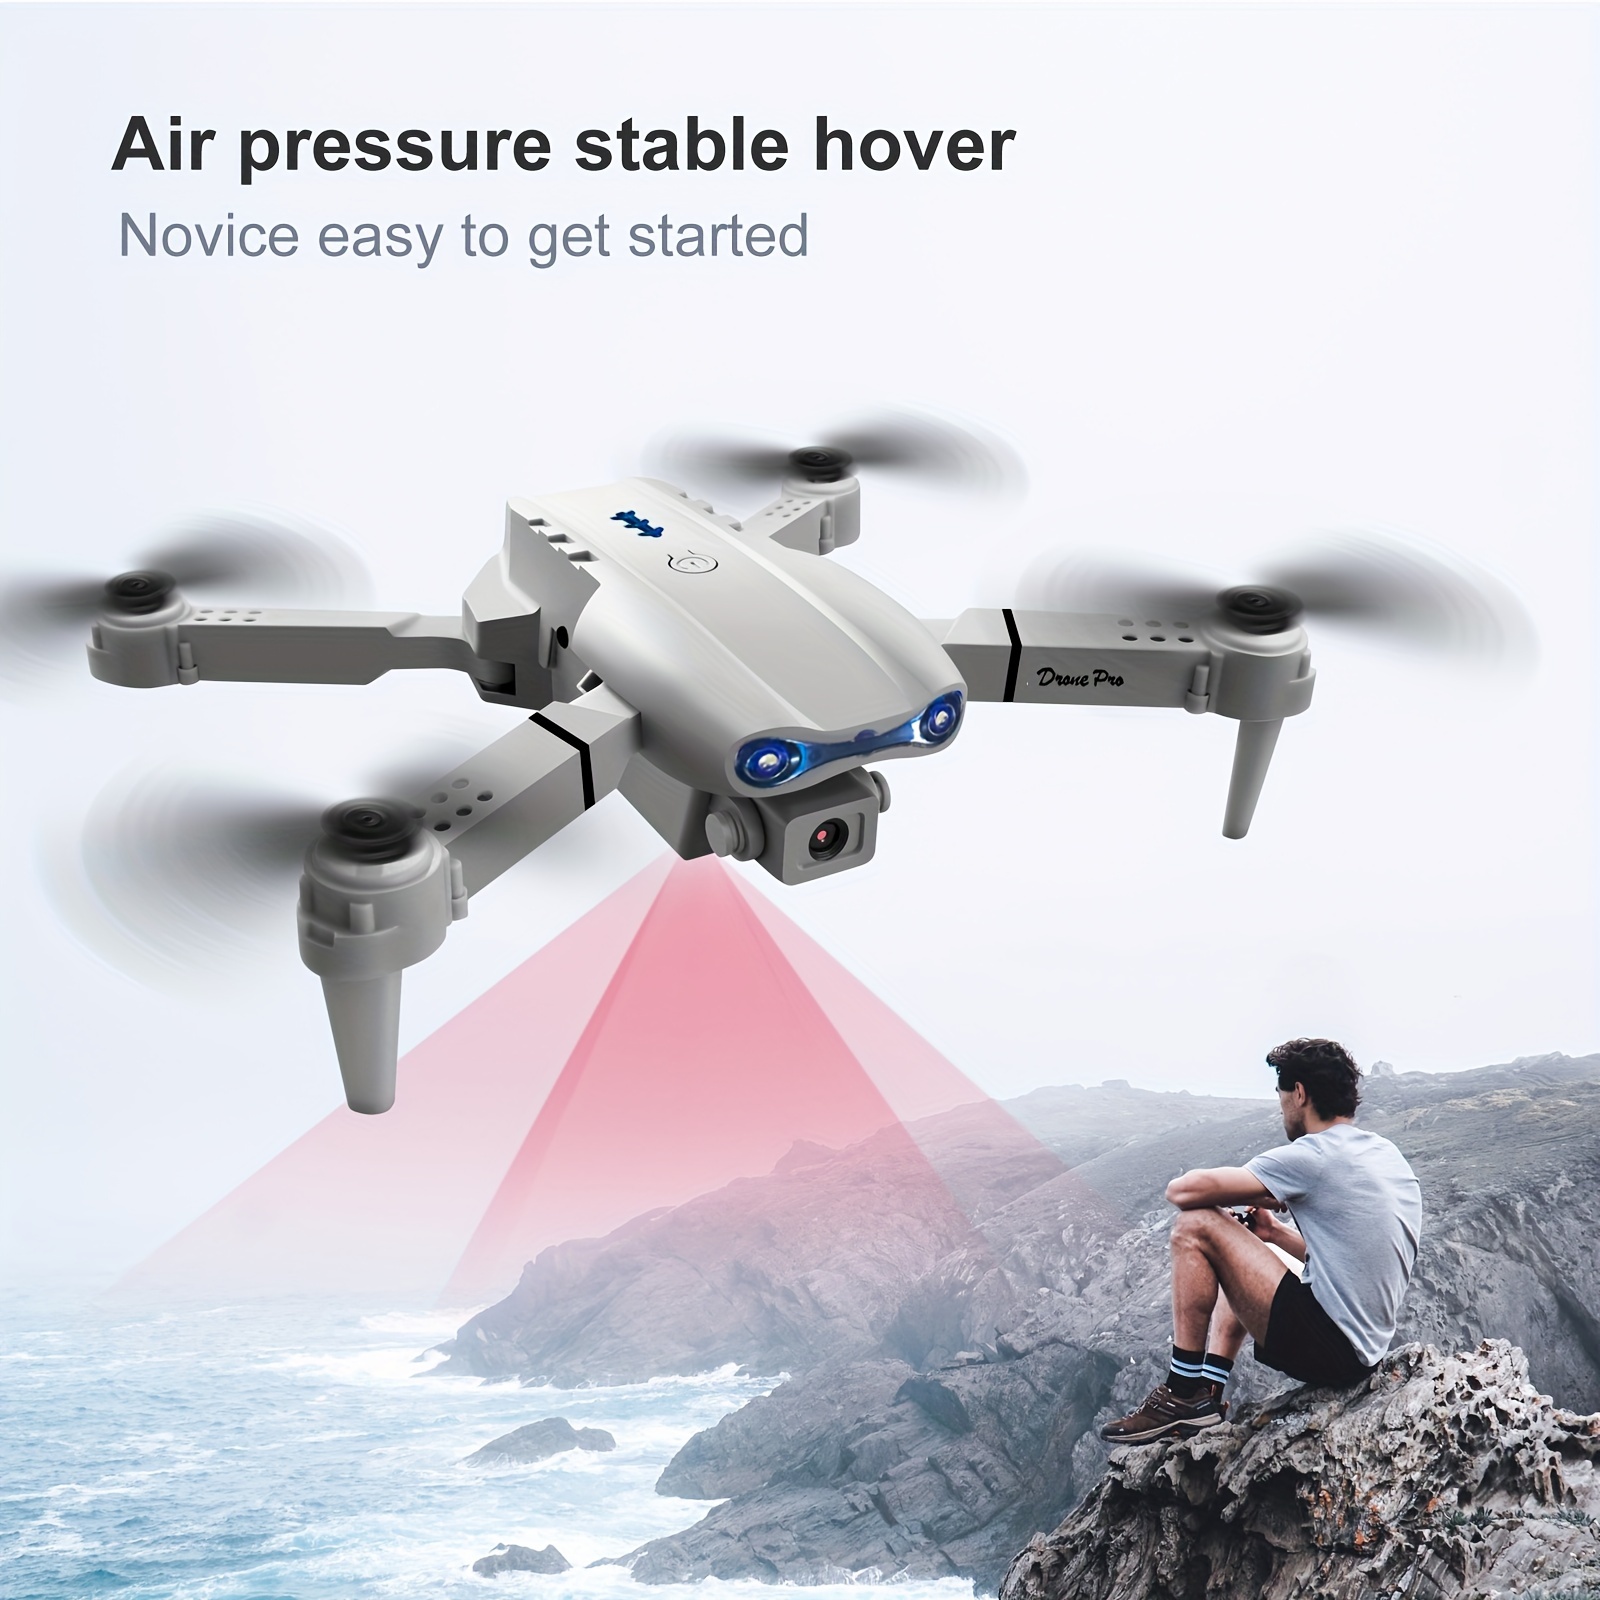 new e99 quadcopter drone with hd camera one key takeoff and landing altitude hold 360 stunt rolling supports wifi connection to mobile app foldable design suitable for beginners christmas gift details 4